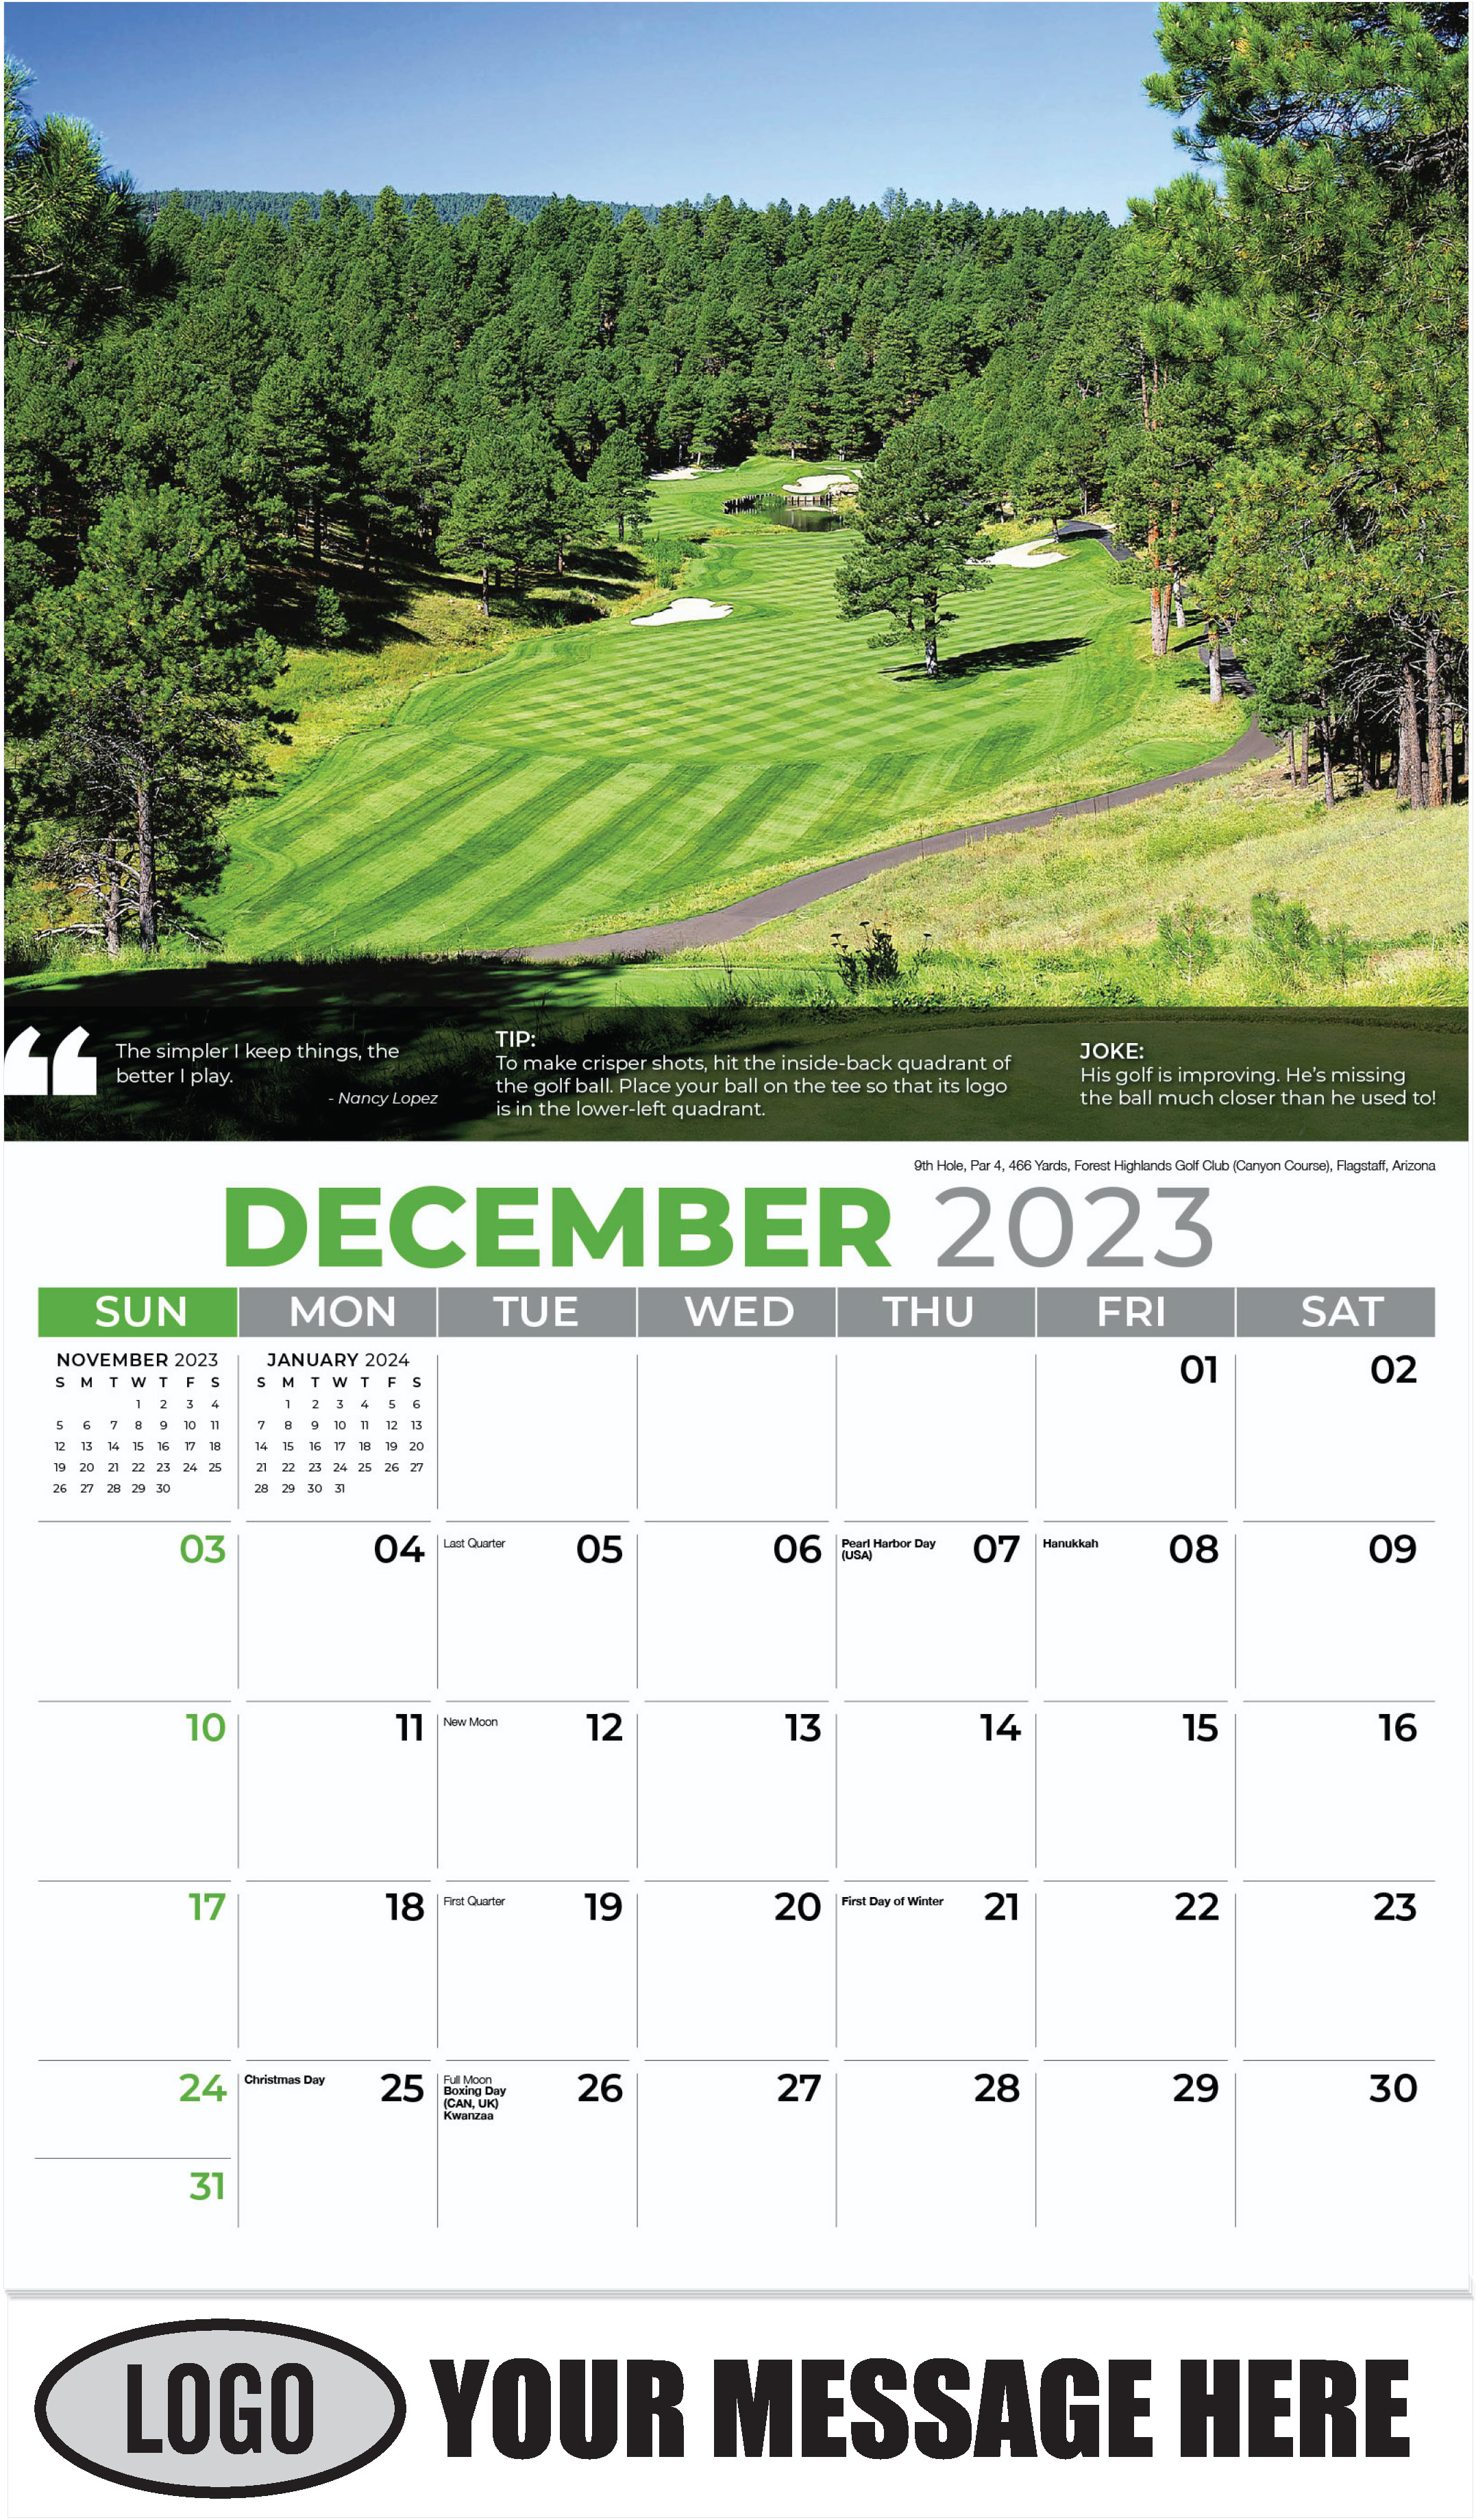 9th Hole, Par 4, 466 Yards, Forest Highlands Golf Club (Canyon Course), Flagstaff, Arizona - December 2023 - Golf Tips  (Tips, Quips and Holes) 2023 Promotional Calendar